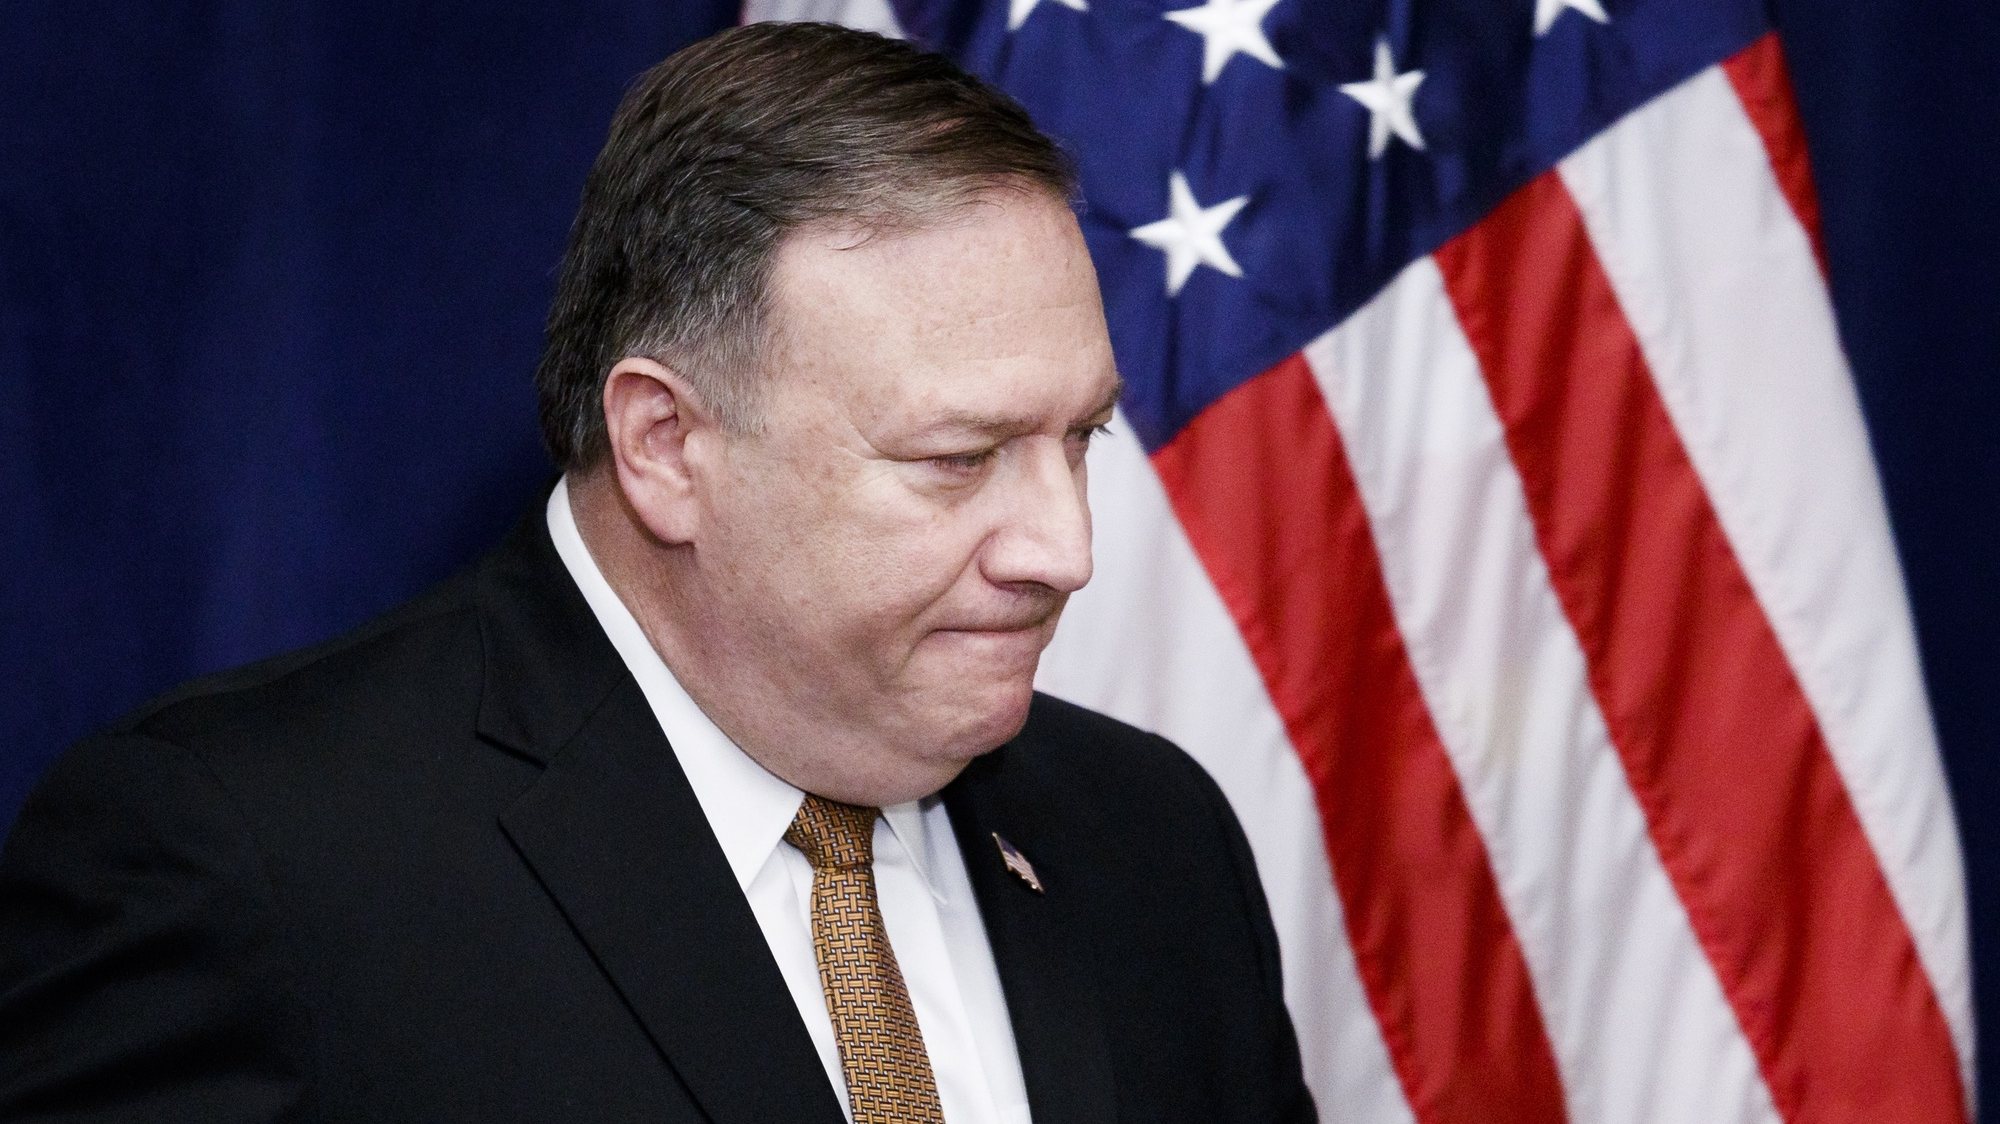 epa08933377 (FILE) - US Secretary of State Mike Pompeo leaves a press conference following a meeting with a North Korean official in New York, USA, 31 May 2018 (reissued 12 January 2021). The US State Department on 12 January 2021 announced that State Secretary Mike Pompeo&#039;s trip to Belgium has been cancelled. The trip was scheduled for 13-14 January.  EPA/JUSTIN LANE *** Local Caption *** 54375281